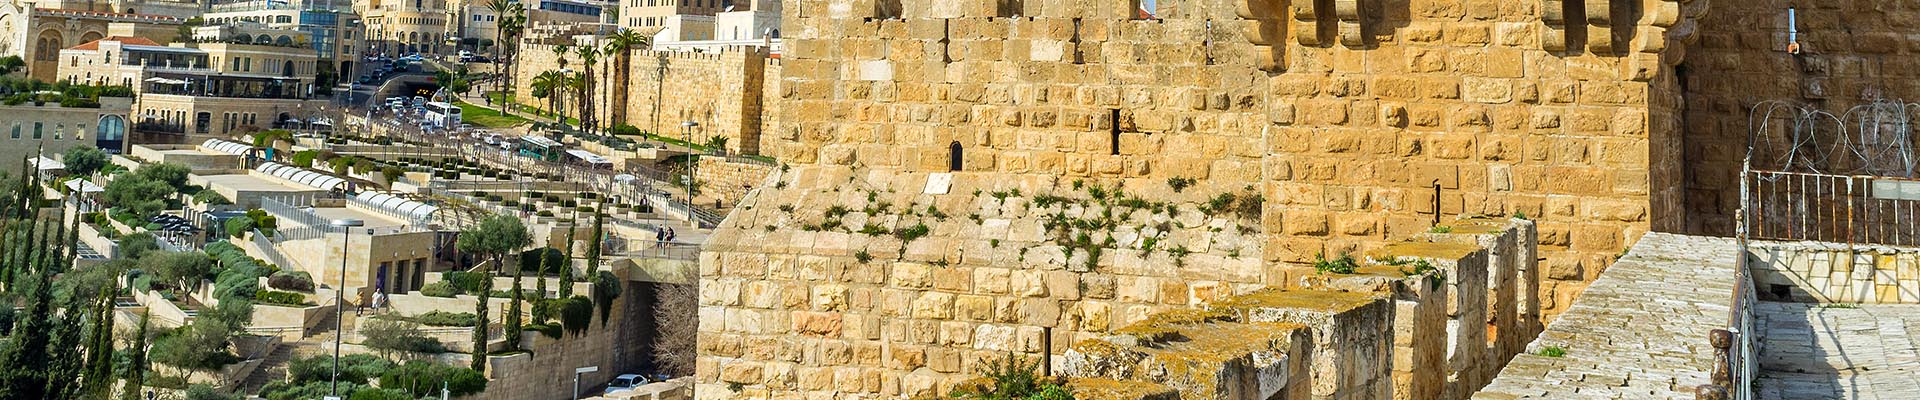 17 Day Israel Jewish Heritage Tour with Jordan and Egypt - Small Group Tour